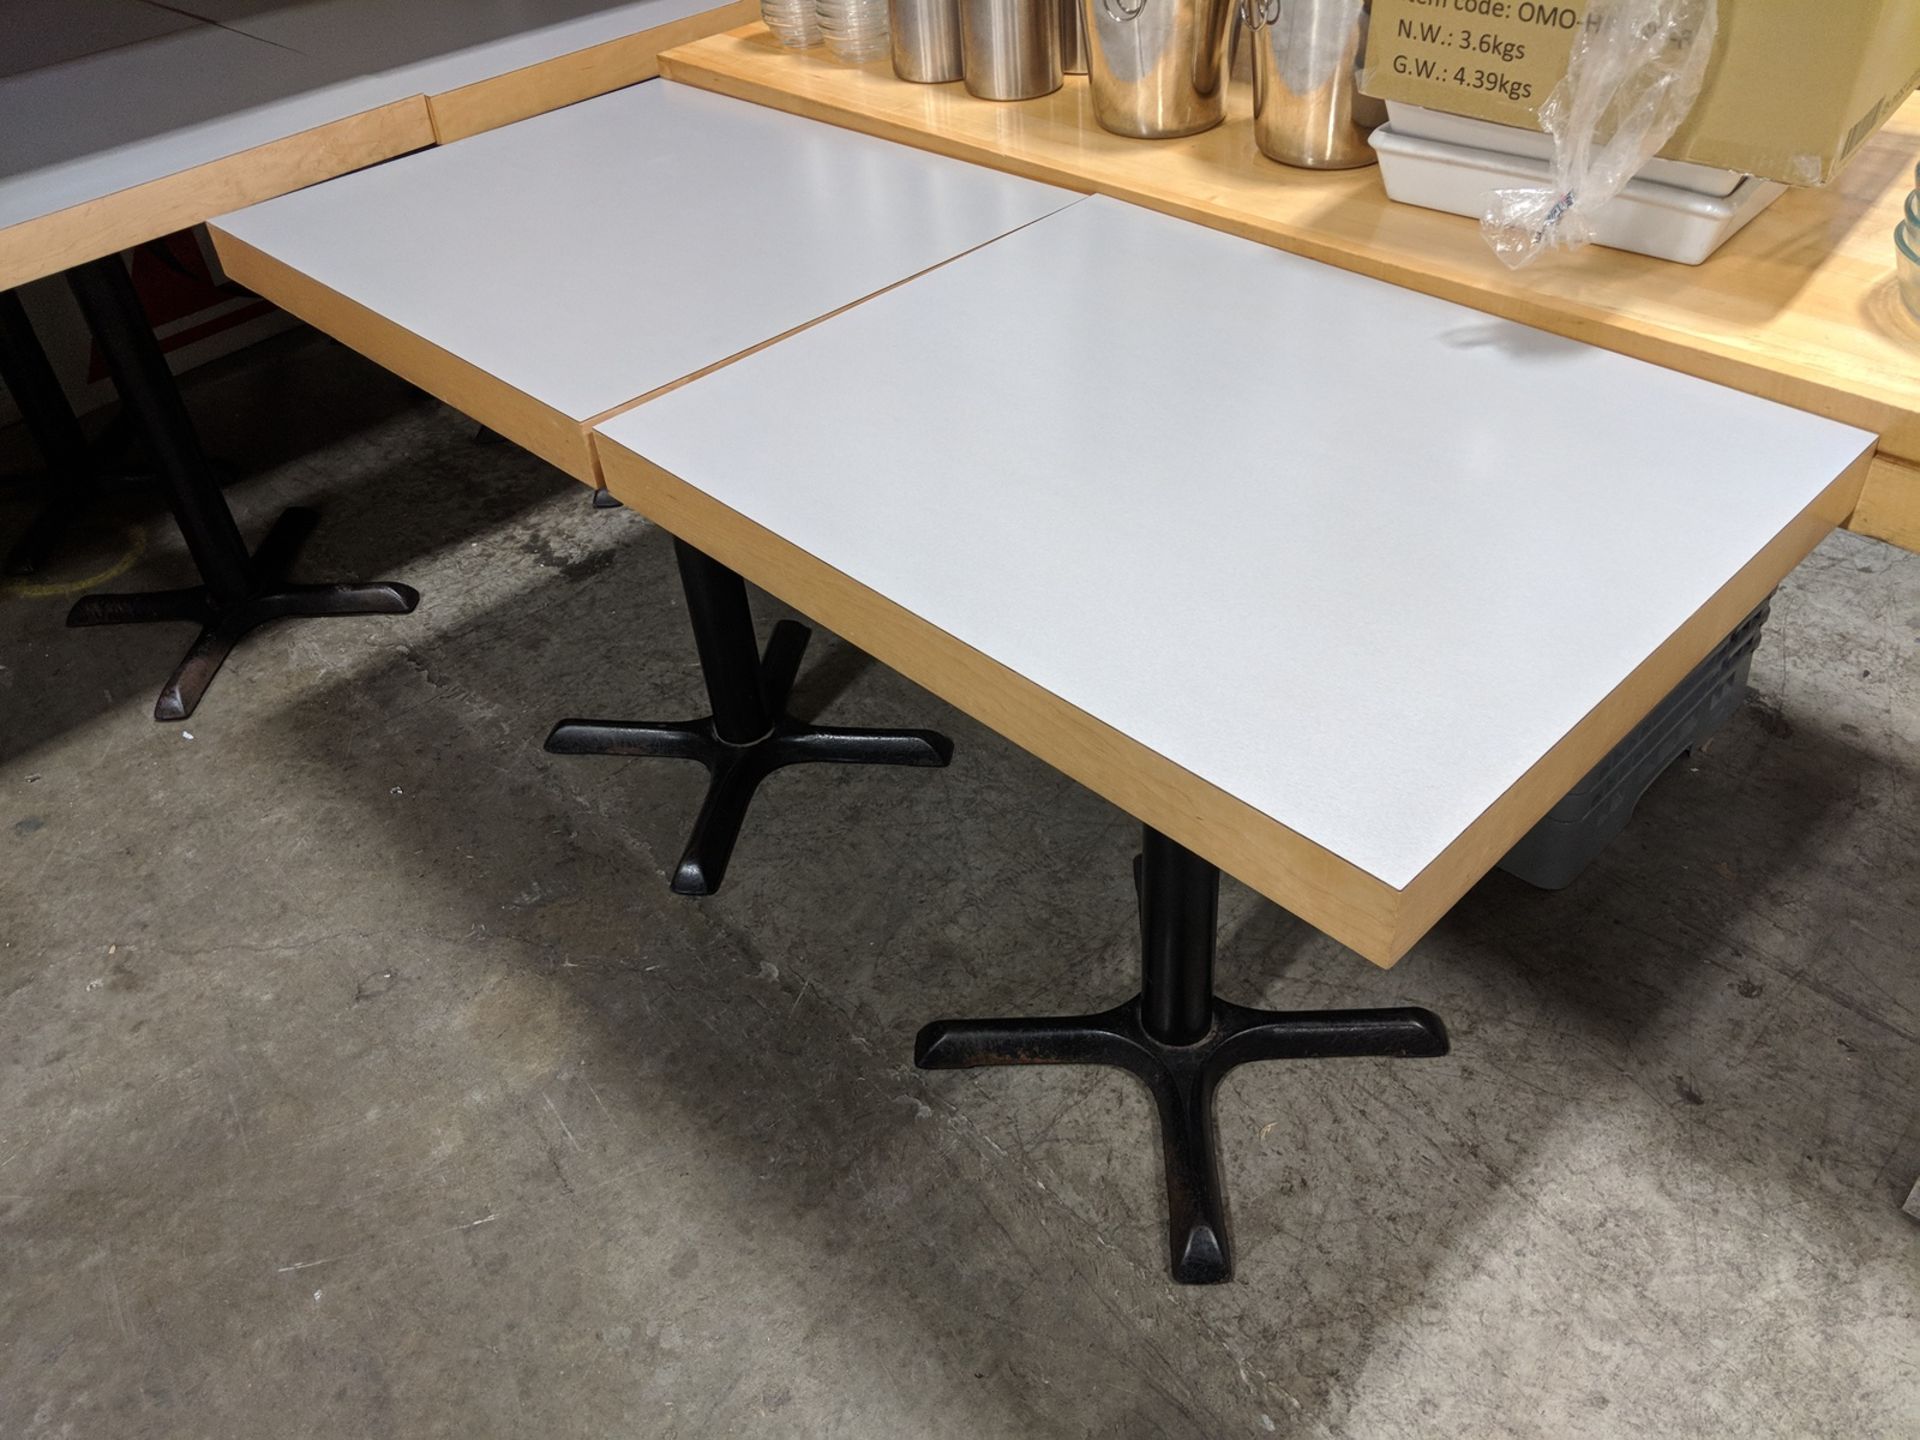 24" x 30" x 30" Dining Tables - Lot of 2